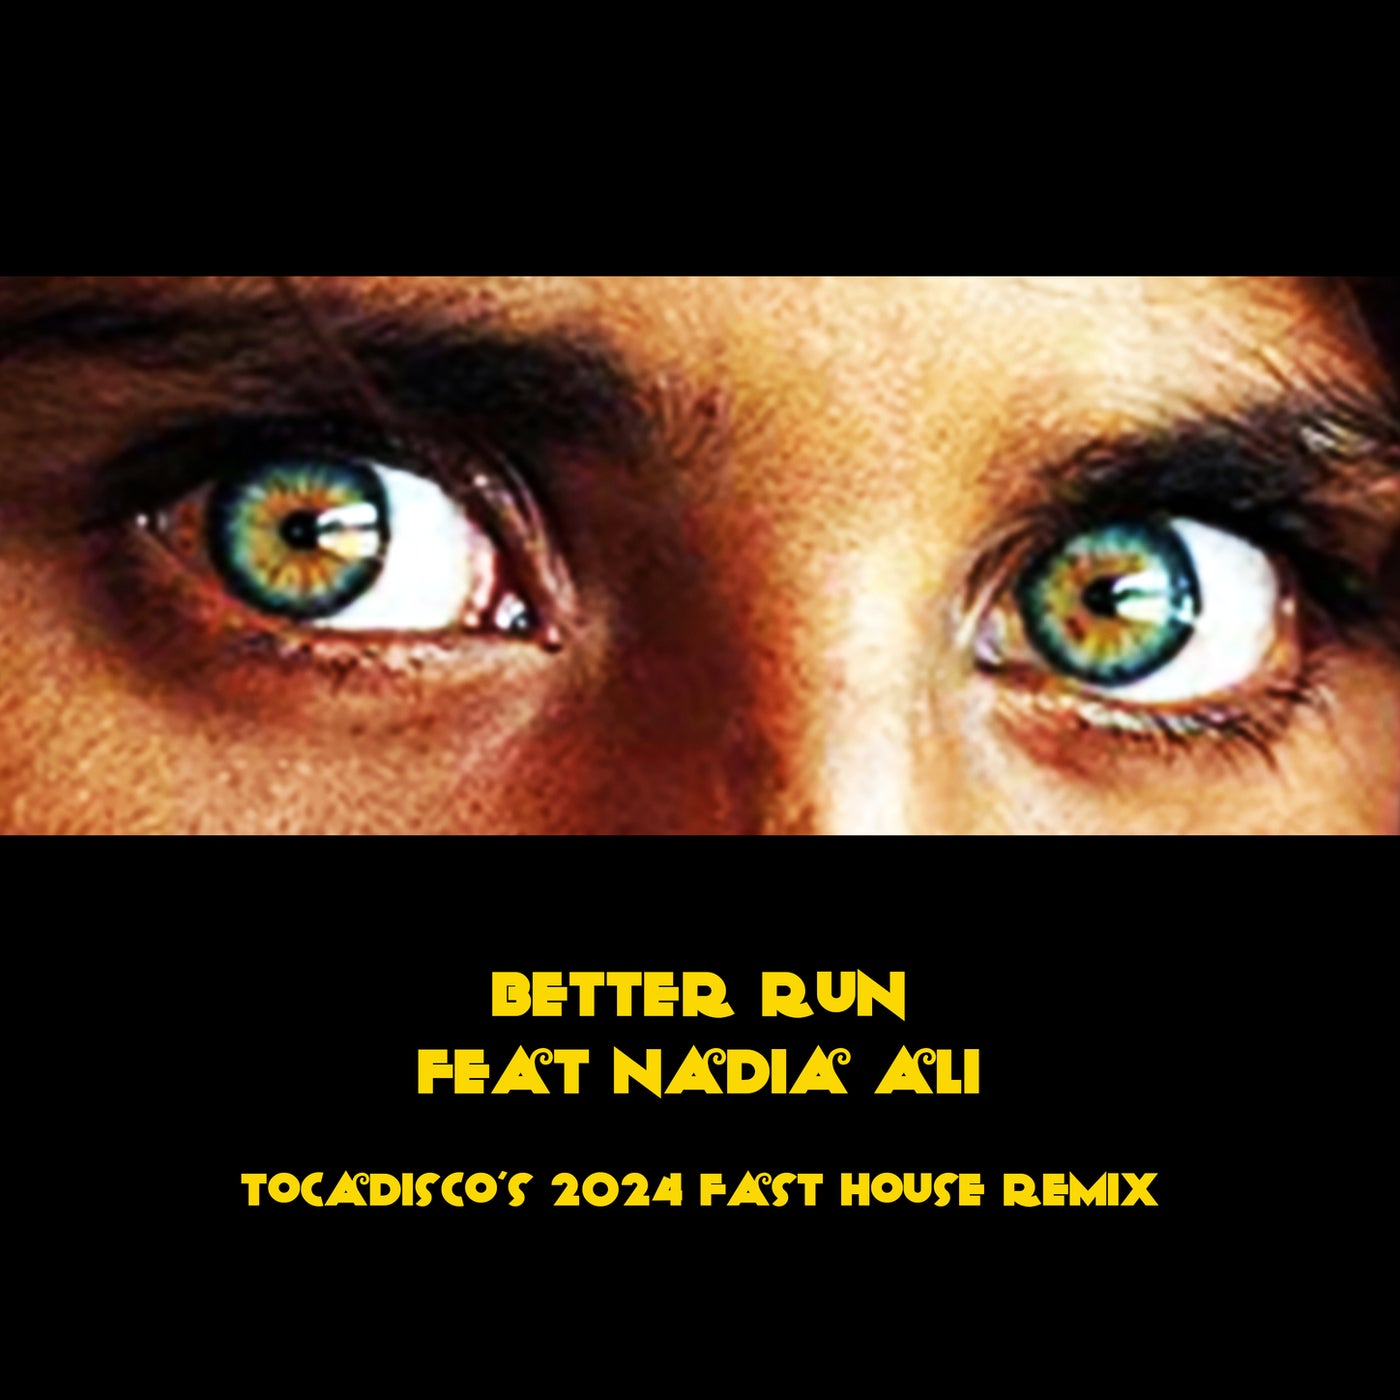 image cover: Tocadisco, Nadia Ali - Better Run (Garidise Parage Fast House Remix) on Toca45 Recordings